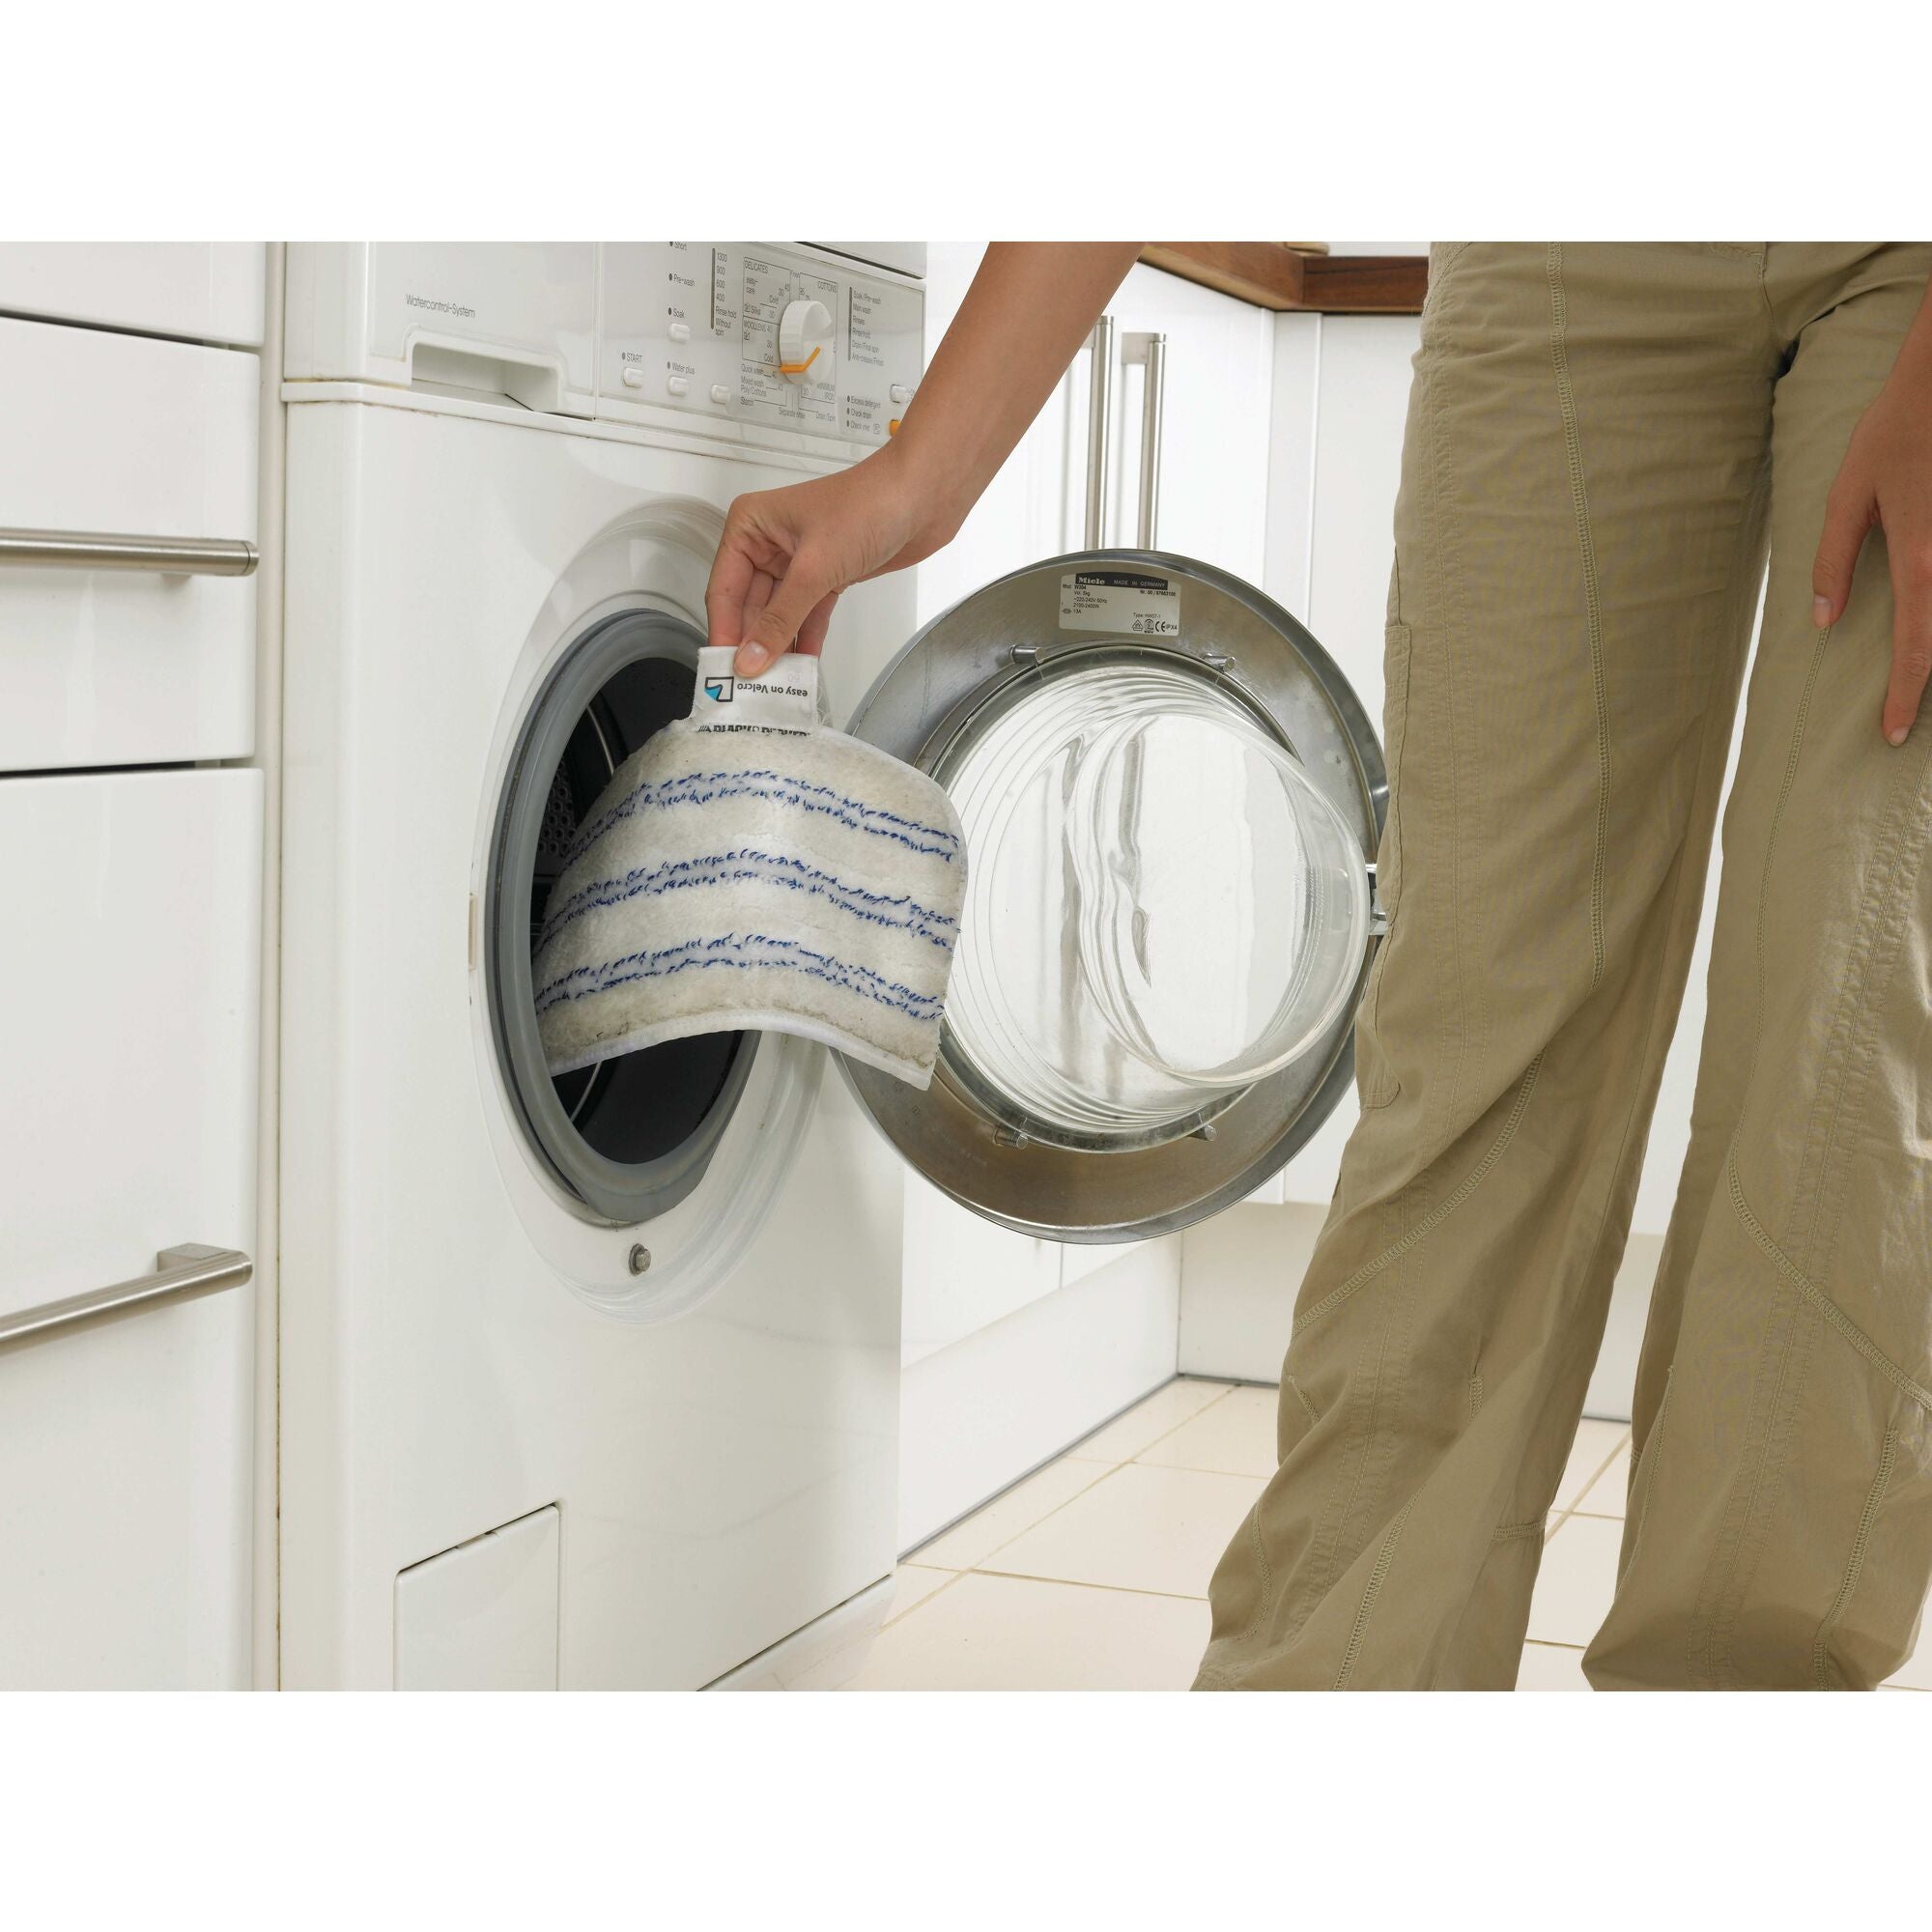 Steam Mop Washable Microfiber Cleaning Pads being washed in a washing machine by a person.